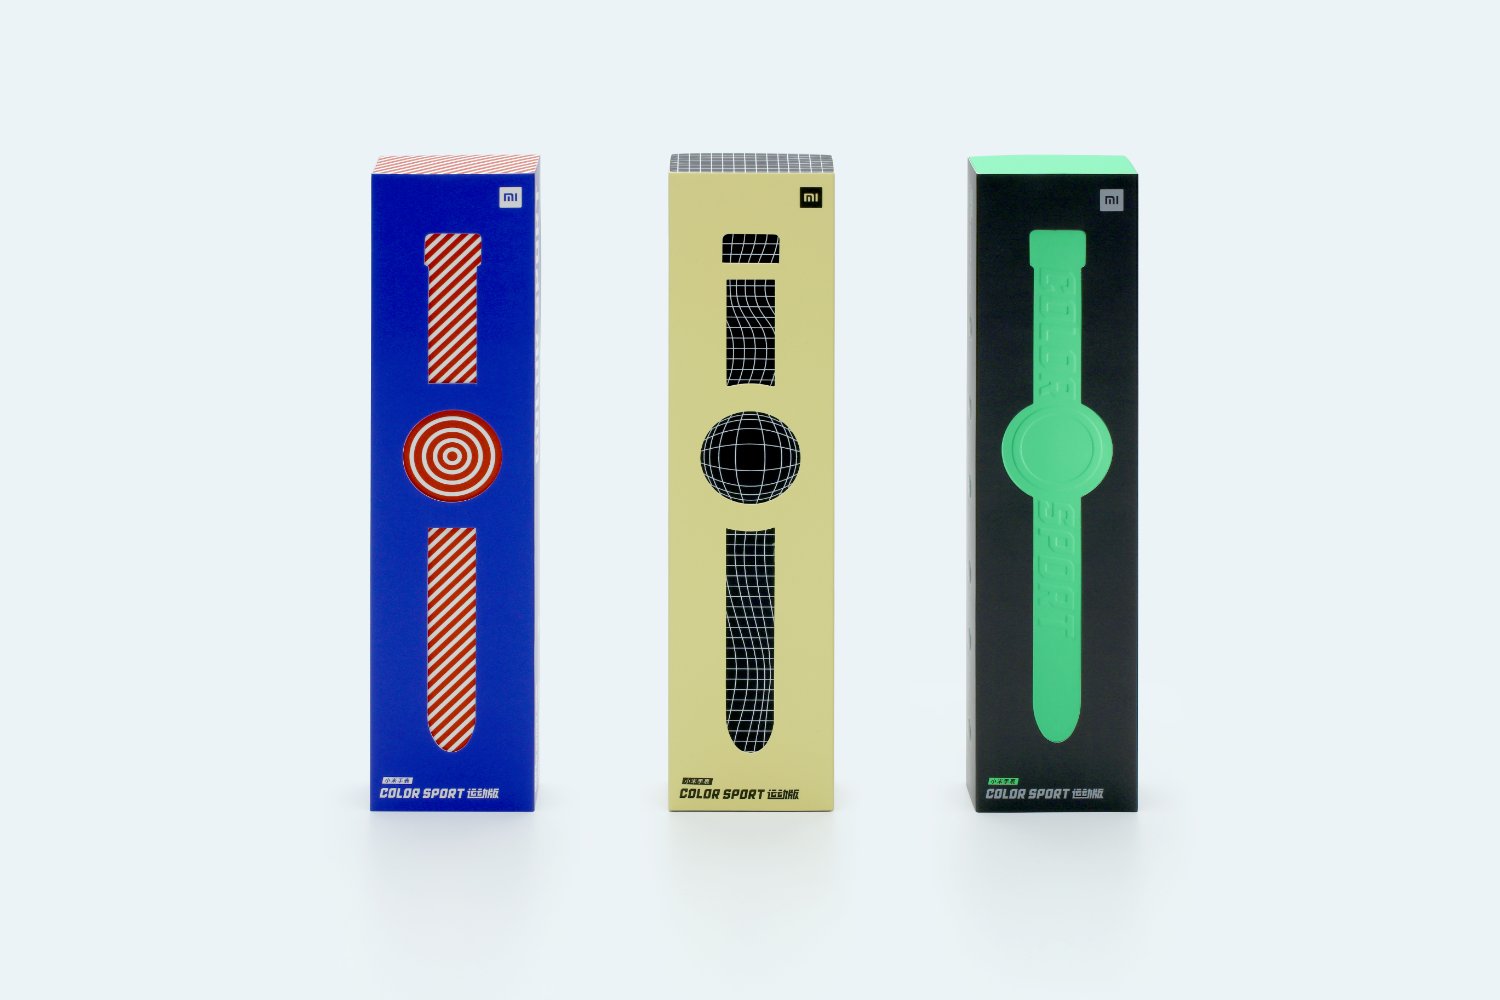 Mi Watch Color Sport Is Both Eco-Friendly And Eye Catching